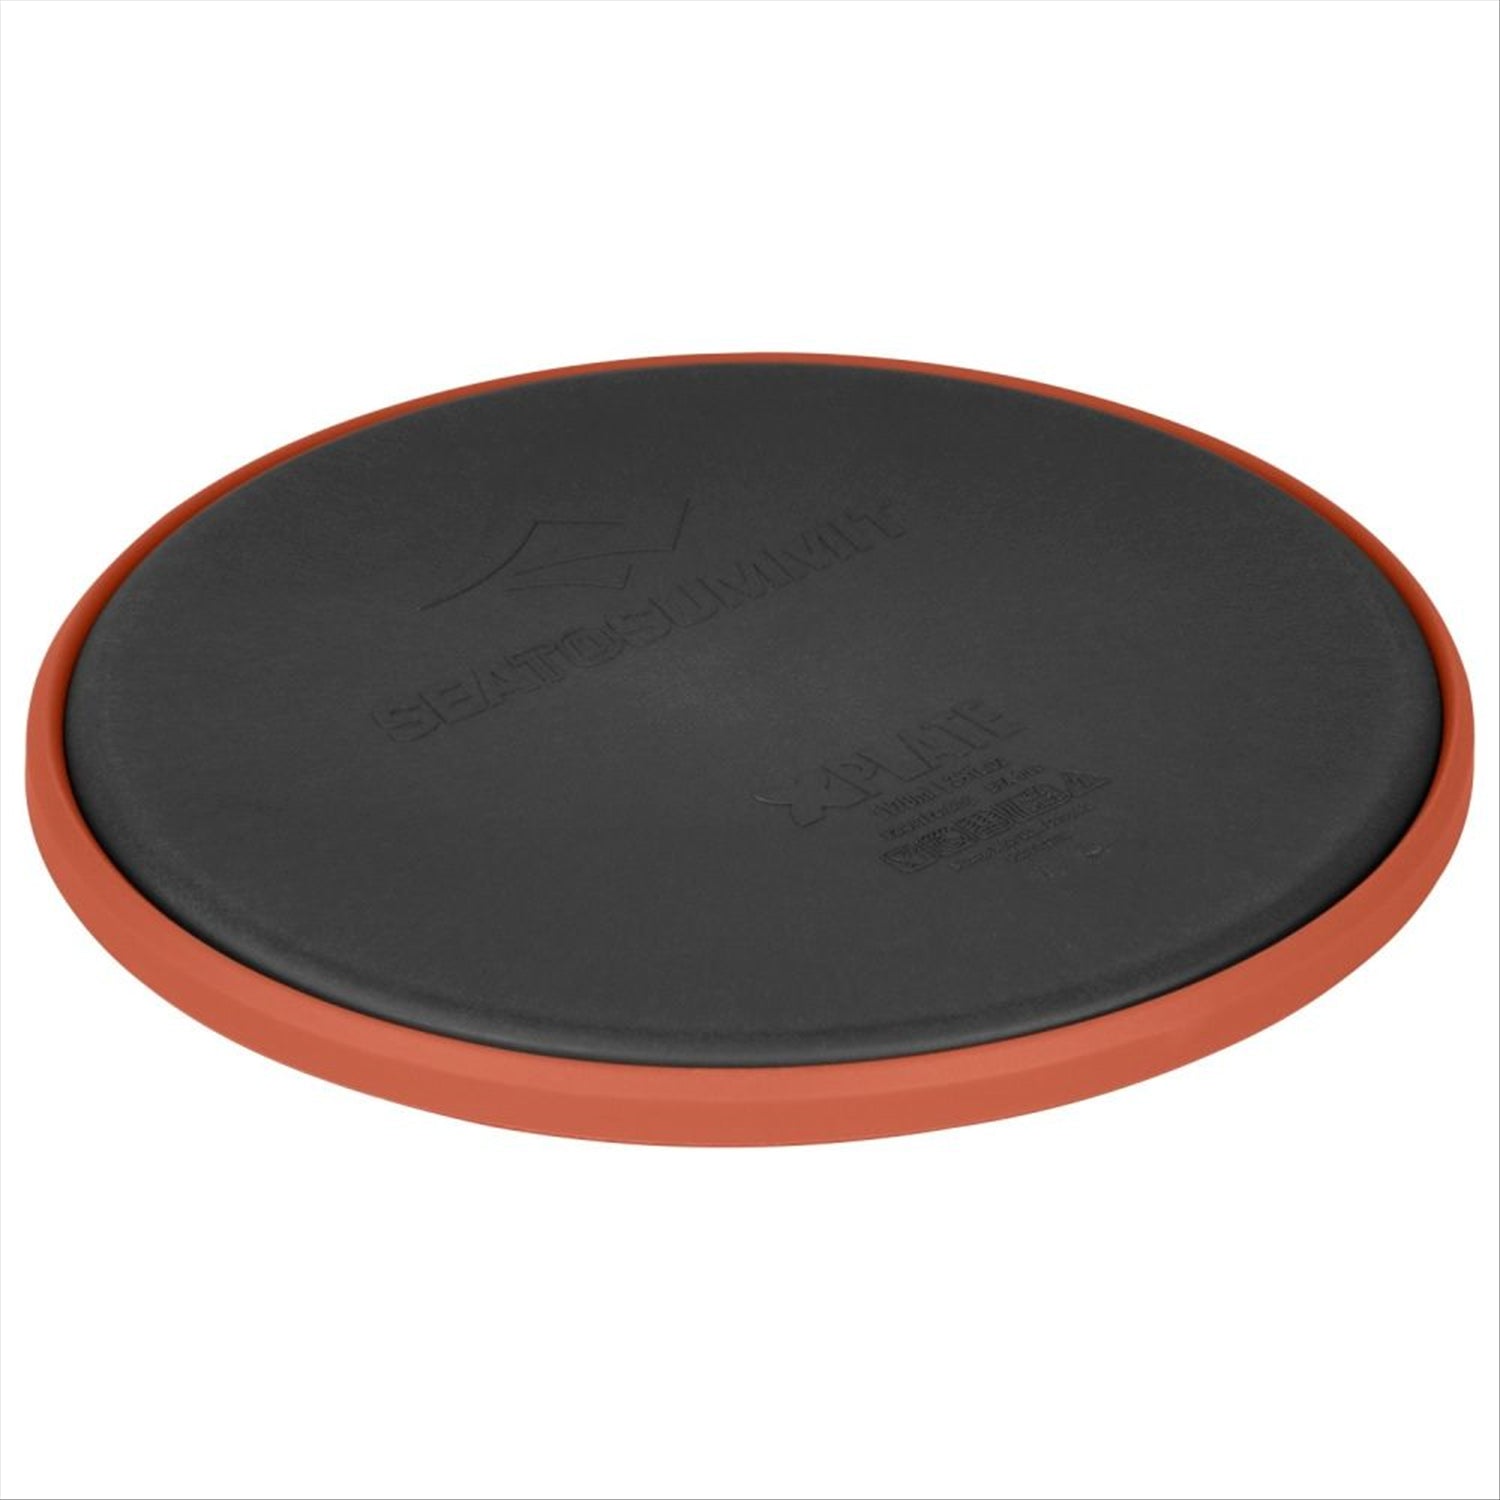 Sea to Summit Sea To Summit X-Plate - Collapsible Camping Plate